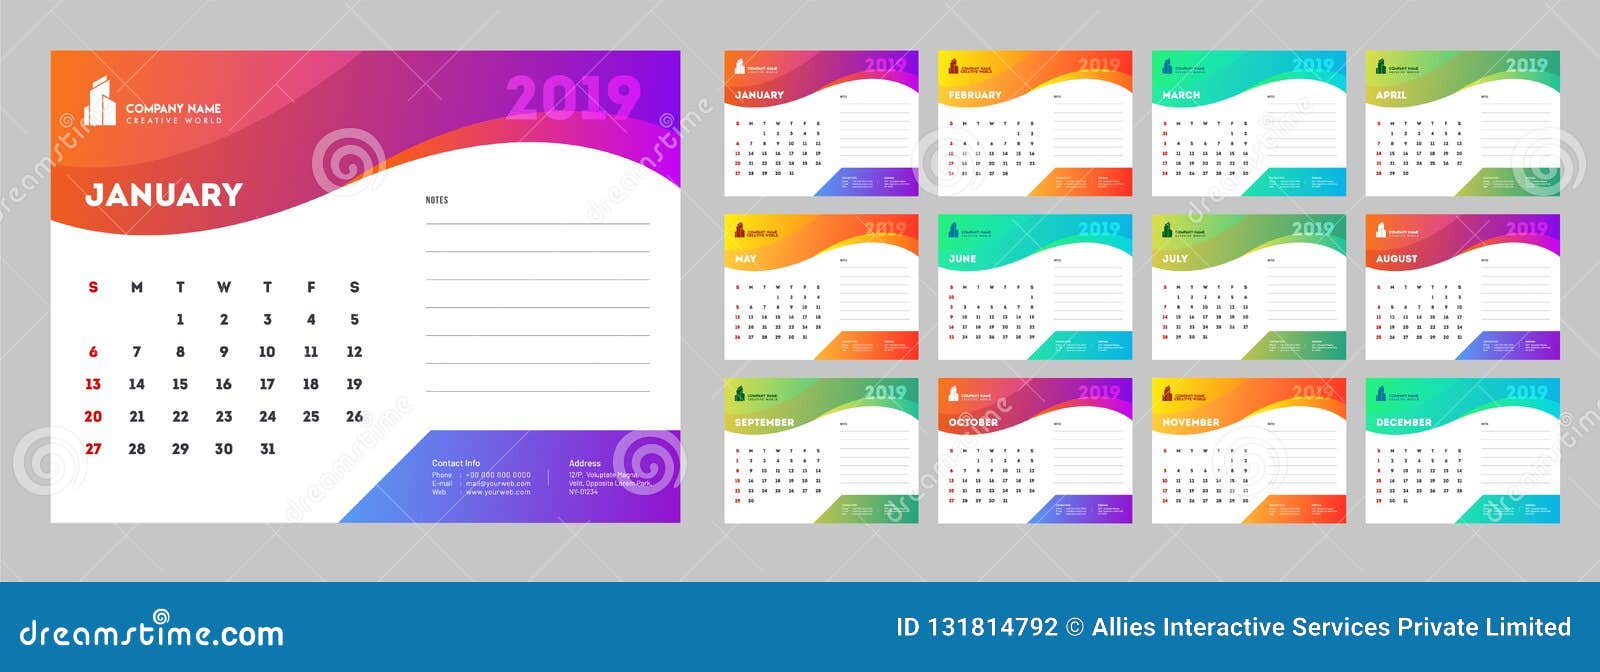 Calendar Design for 2019, Set of 12 Months with Abstract Background. Stock  Illustration - Illustration of july, august: 131814792